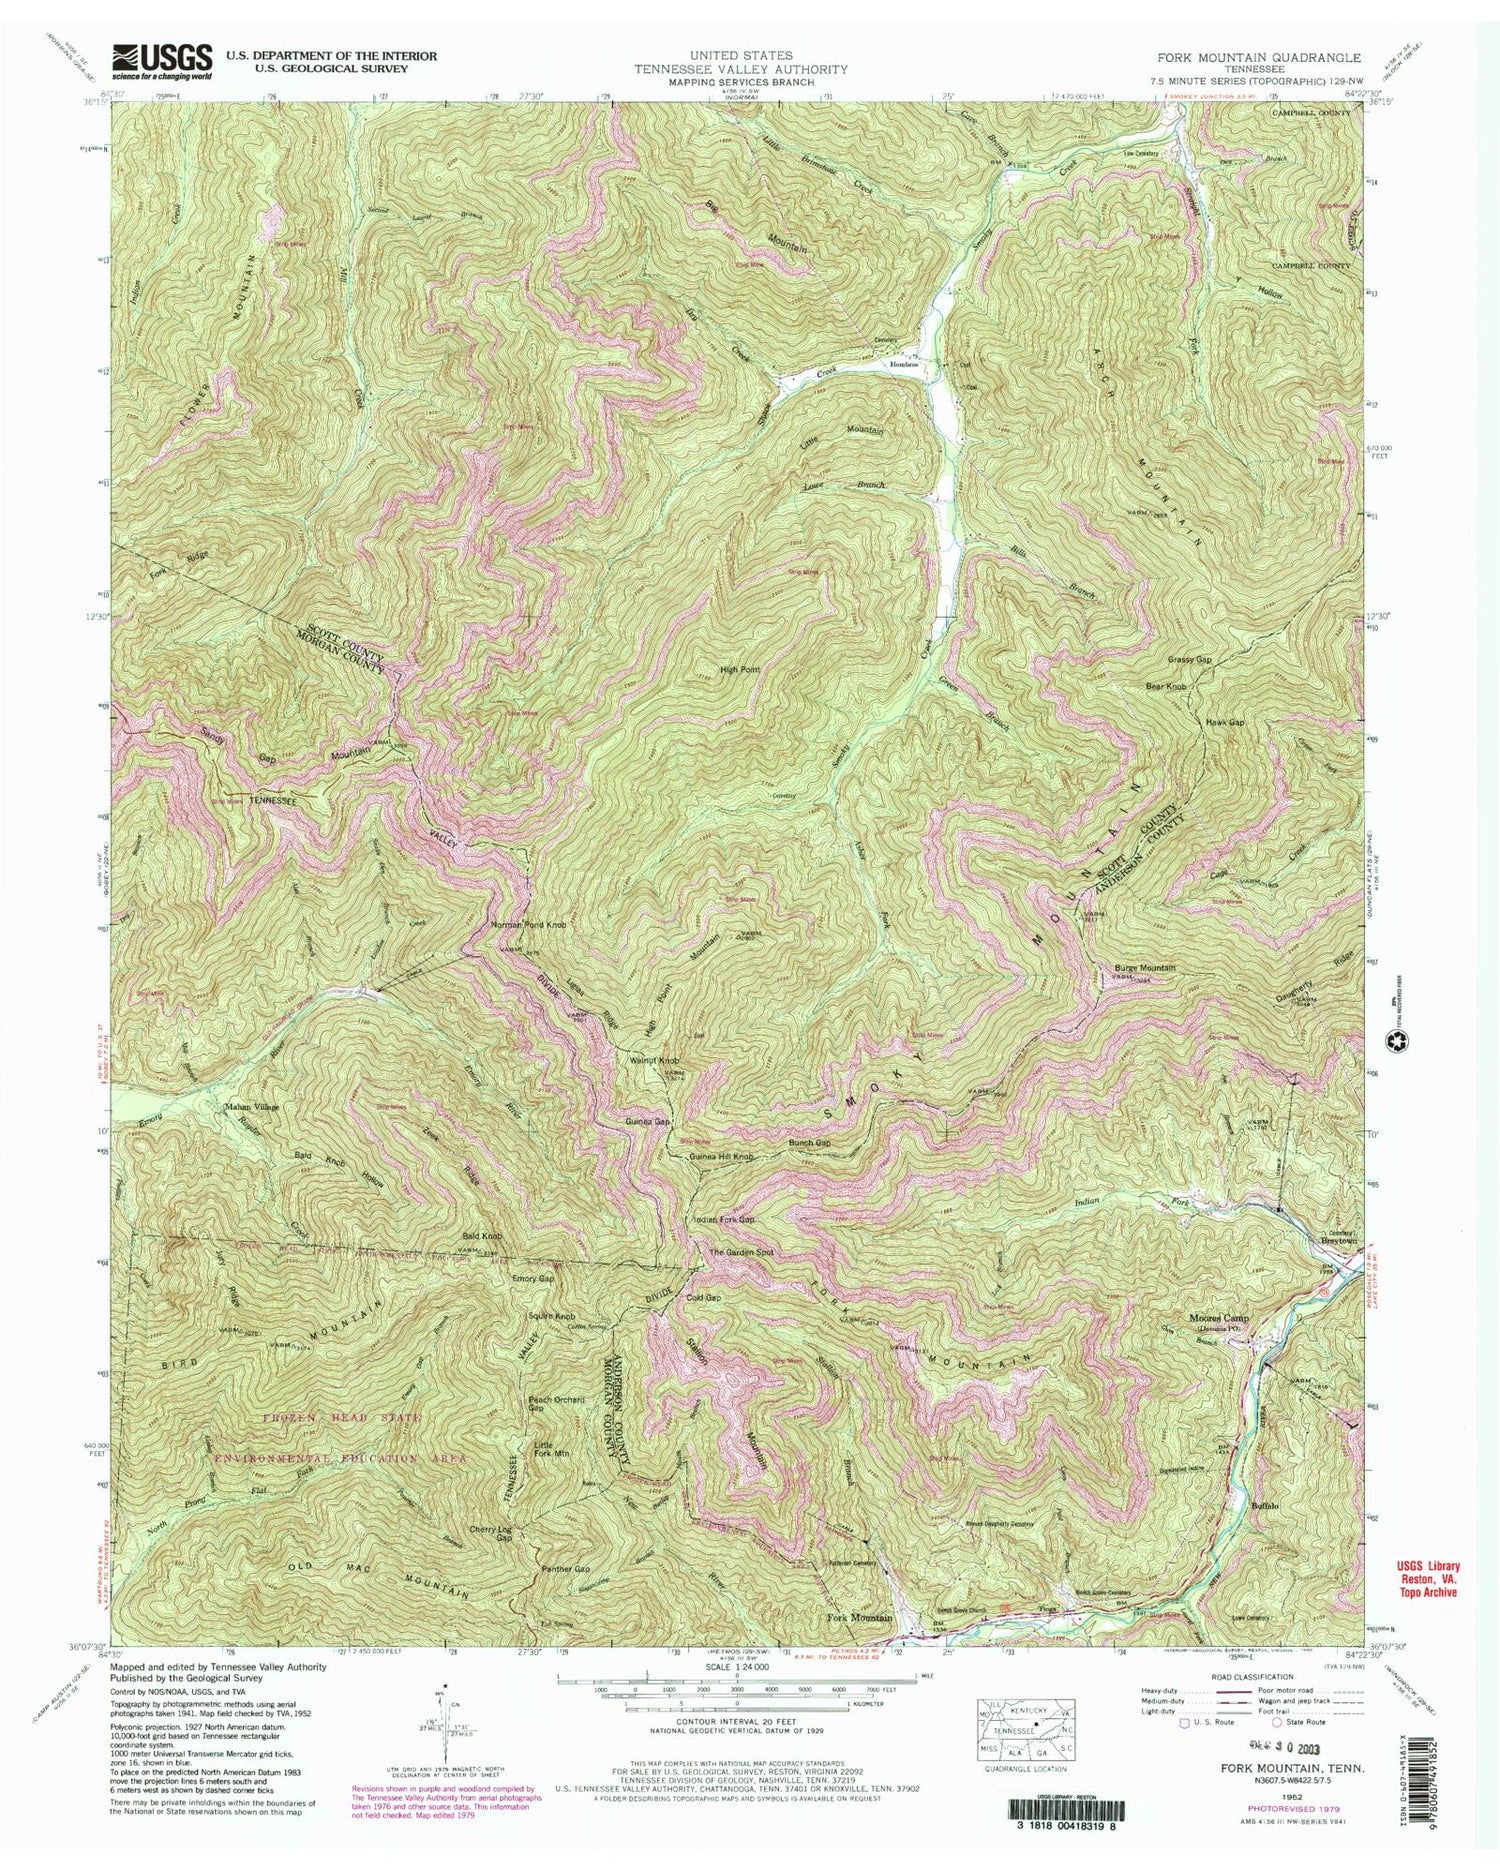 USGS Classic Fork Mountain Tennessee 7.5'x7.5' Topo Map Image